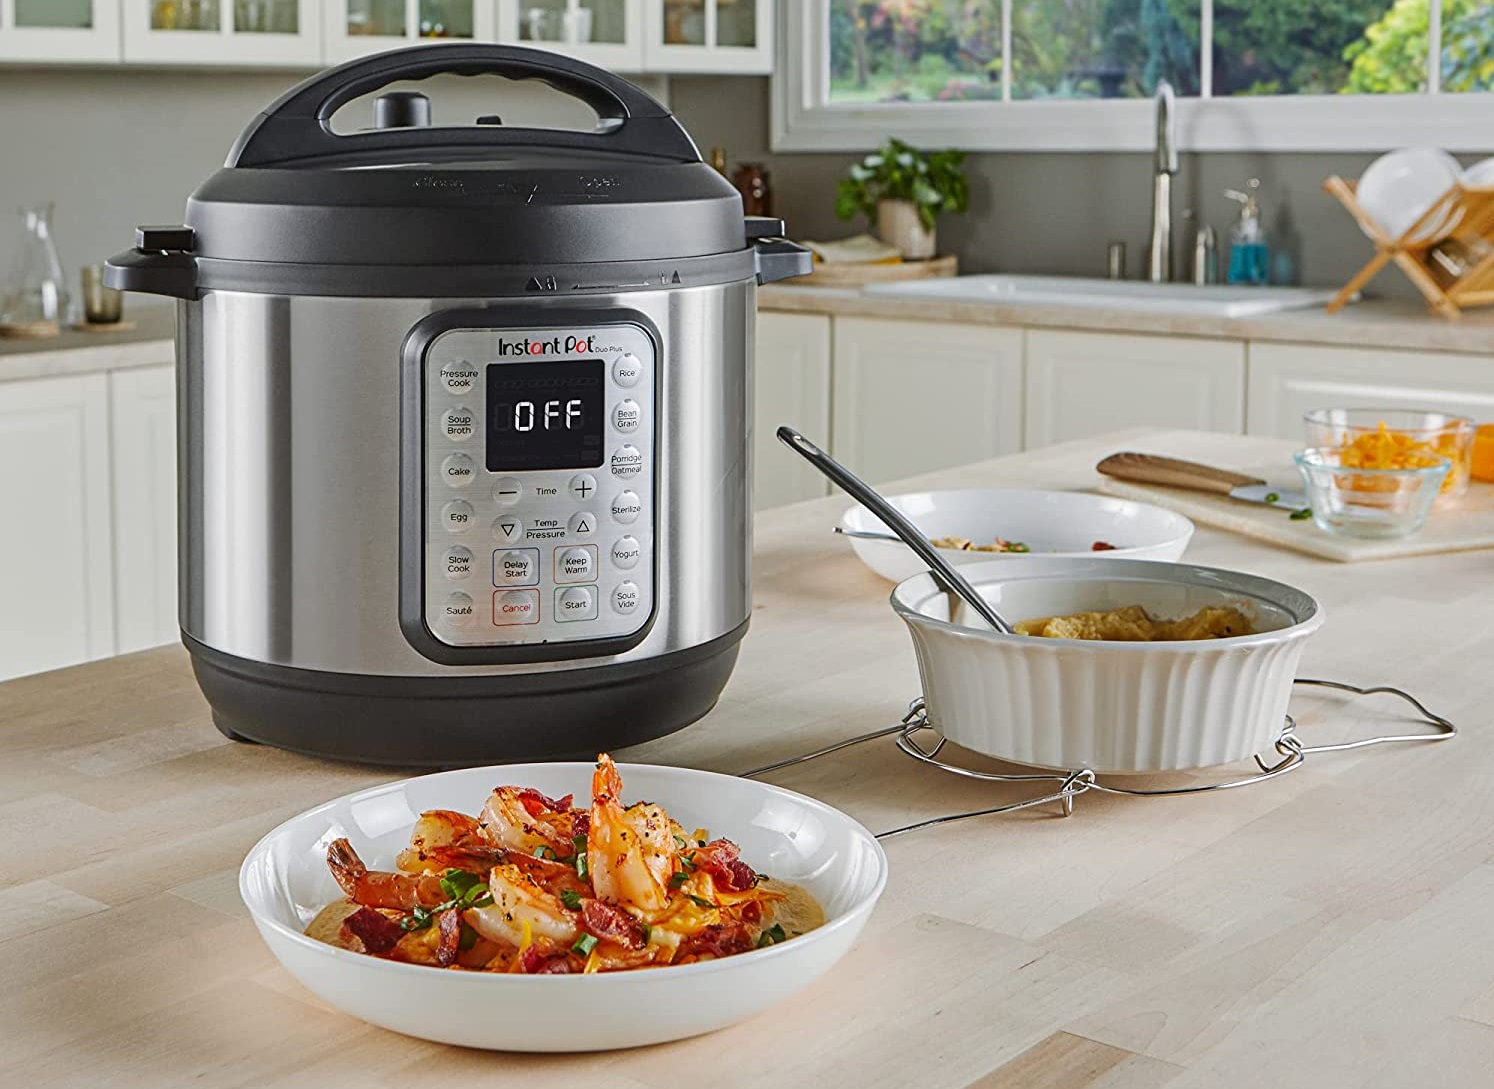 https://www.digitaltrends.com/wp-content/uploads/2021/06/instant-pot-duo-plus-multi-cooker-on-the-counter.jpg?fit=1494%2C1089&p=1